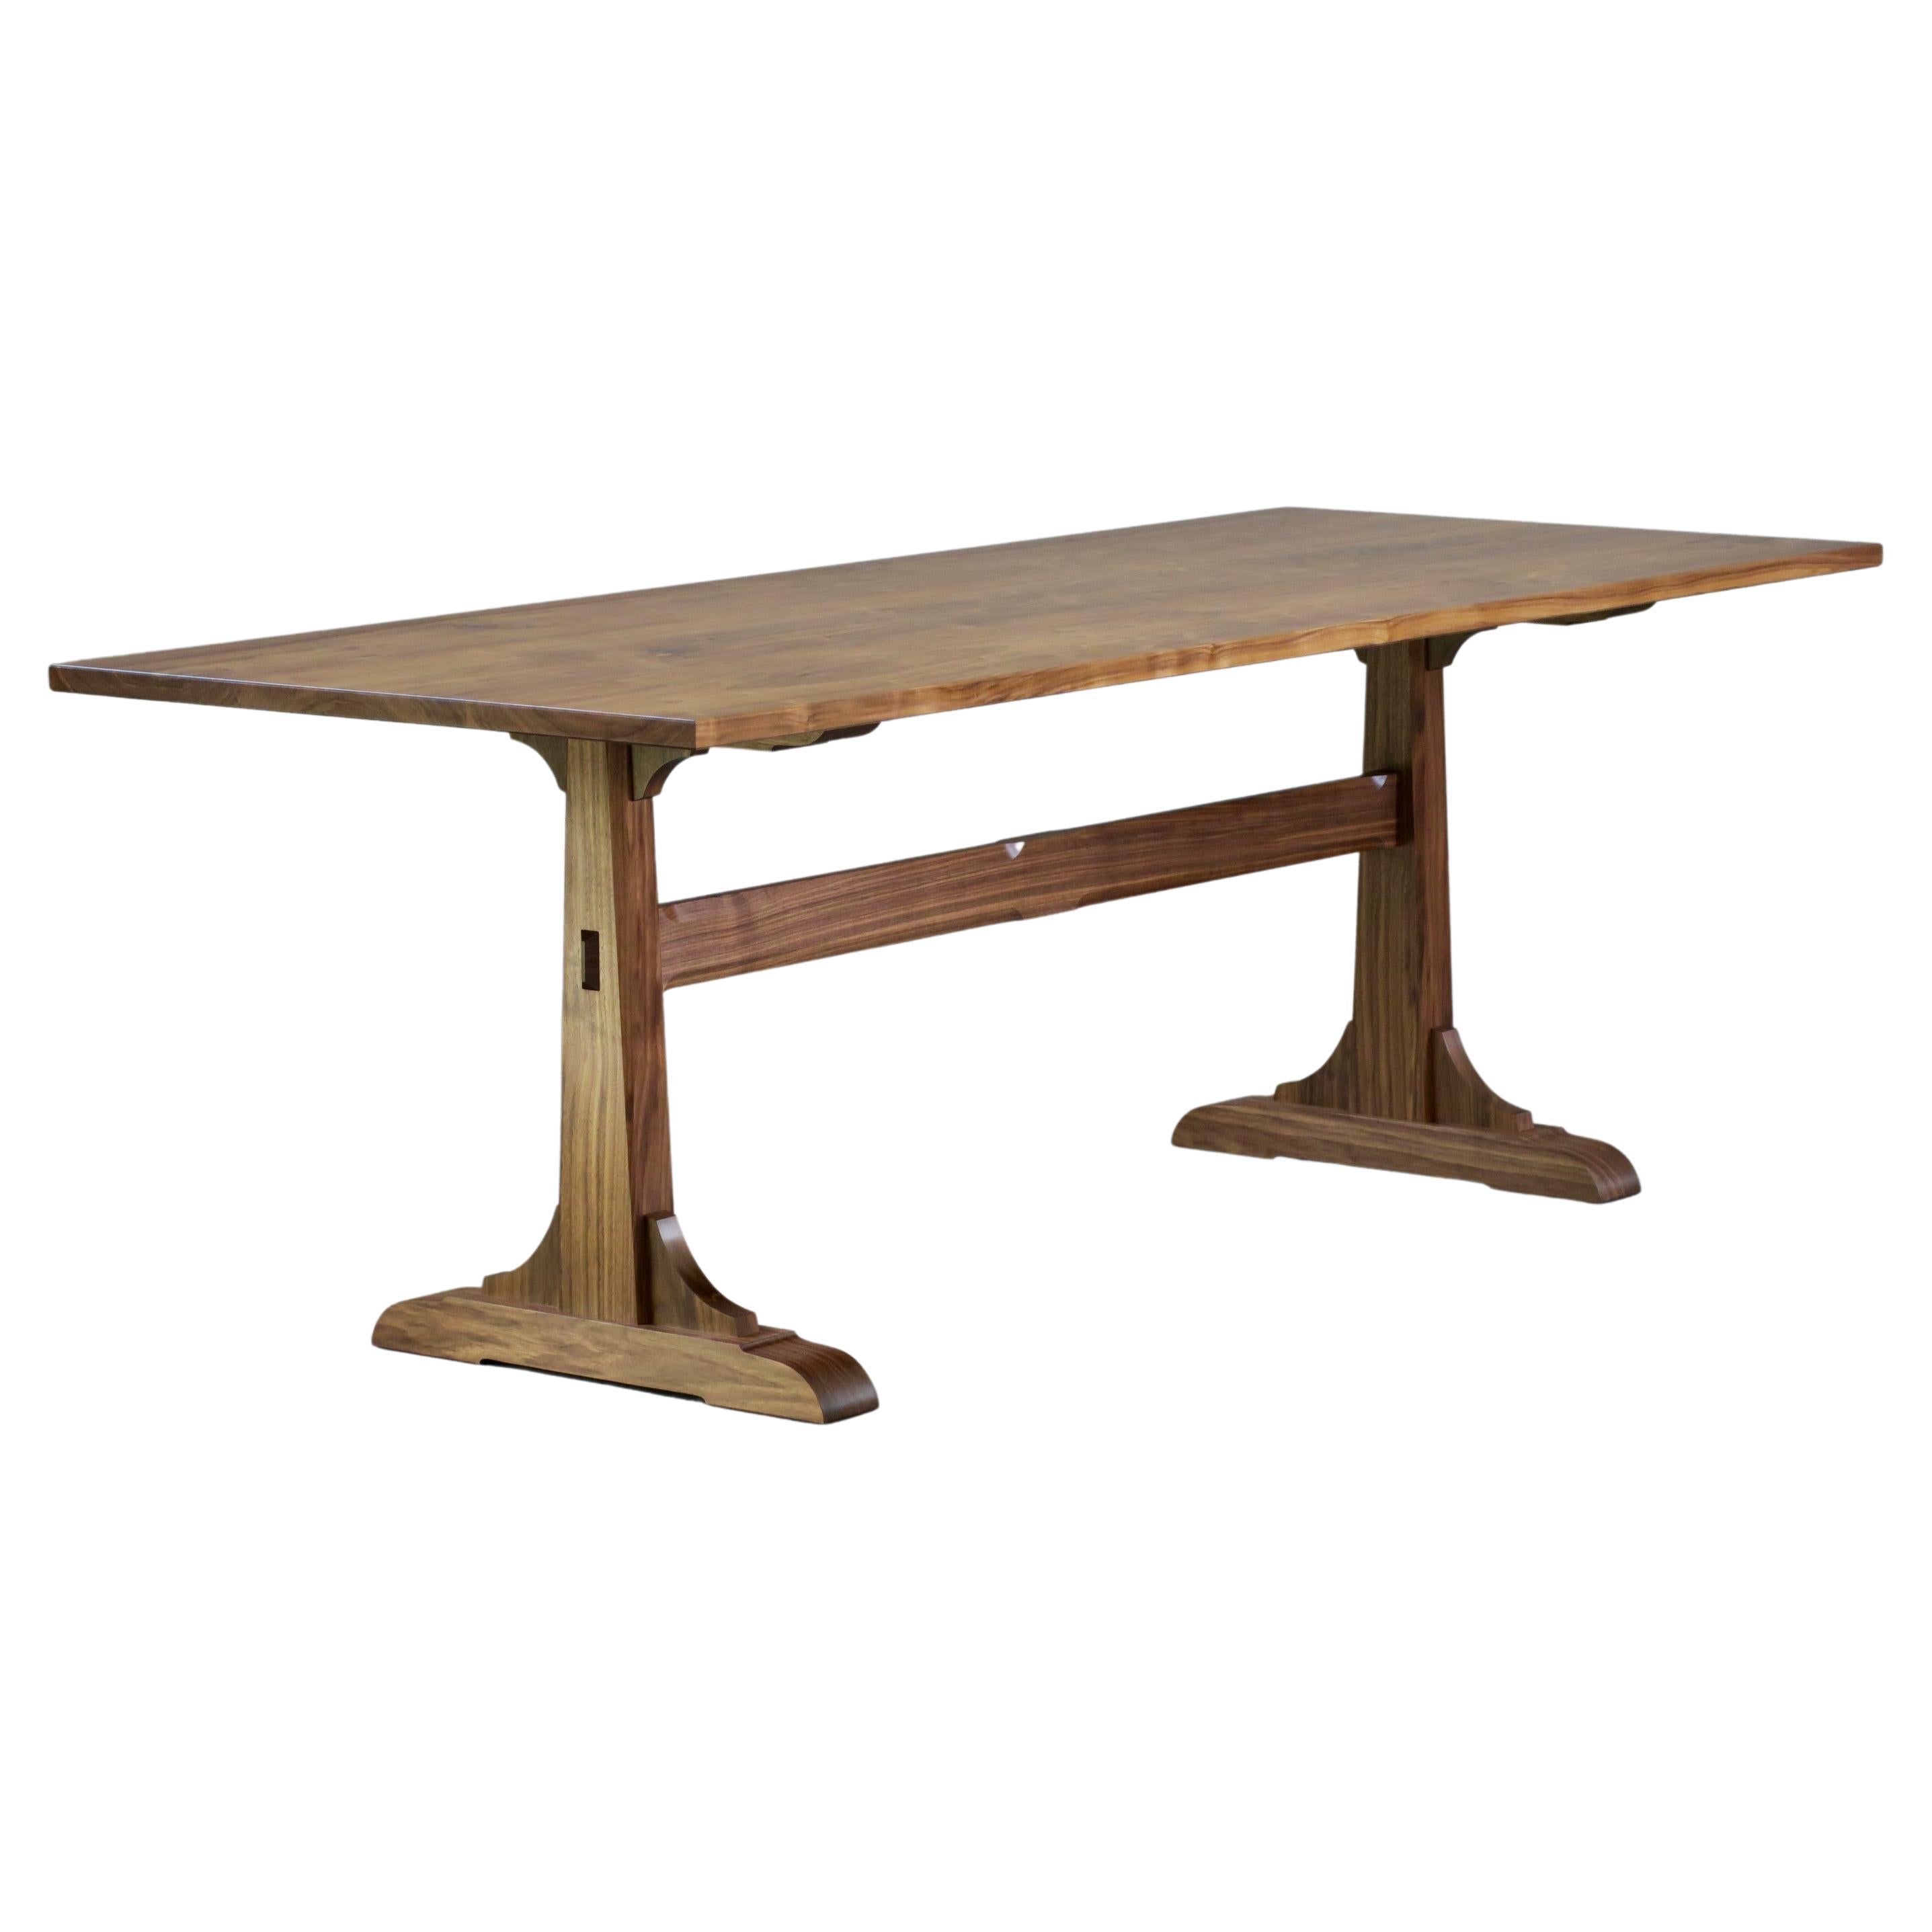 Walnut Trestle Dining Table by Thomas Throop/Black Creek Designs - In Stock